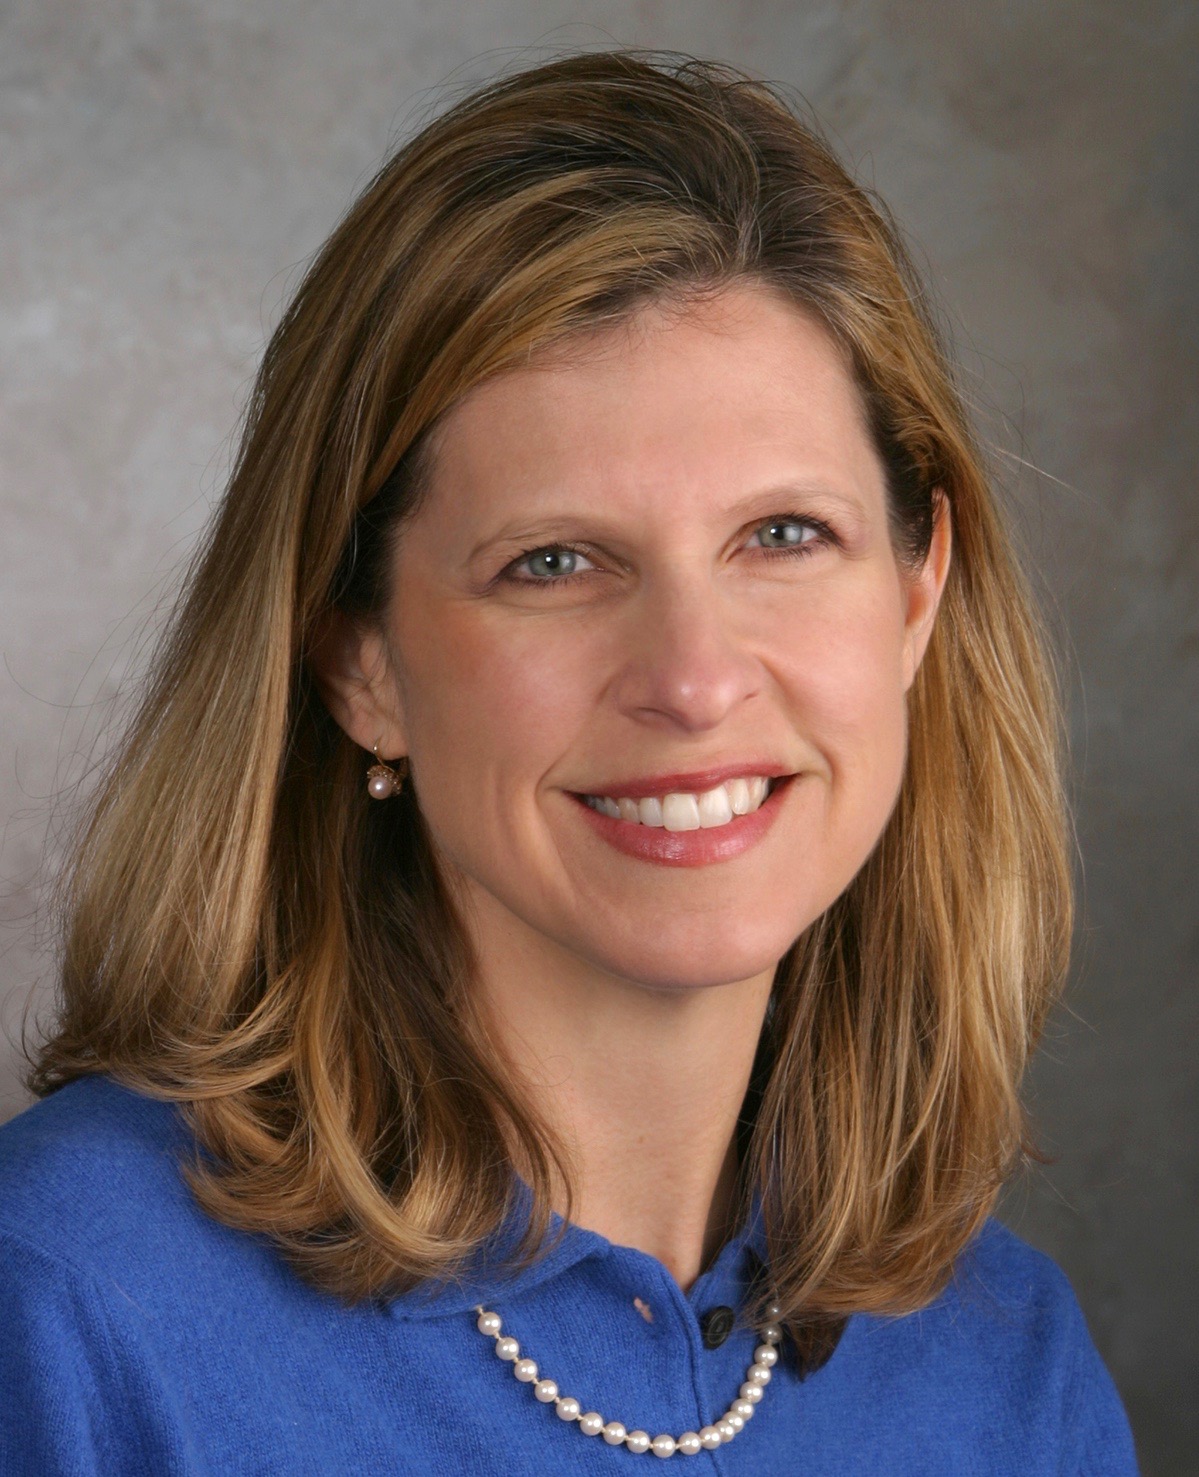 A blond woman in a blue shirt with pearls